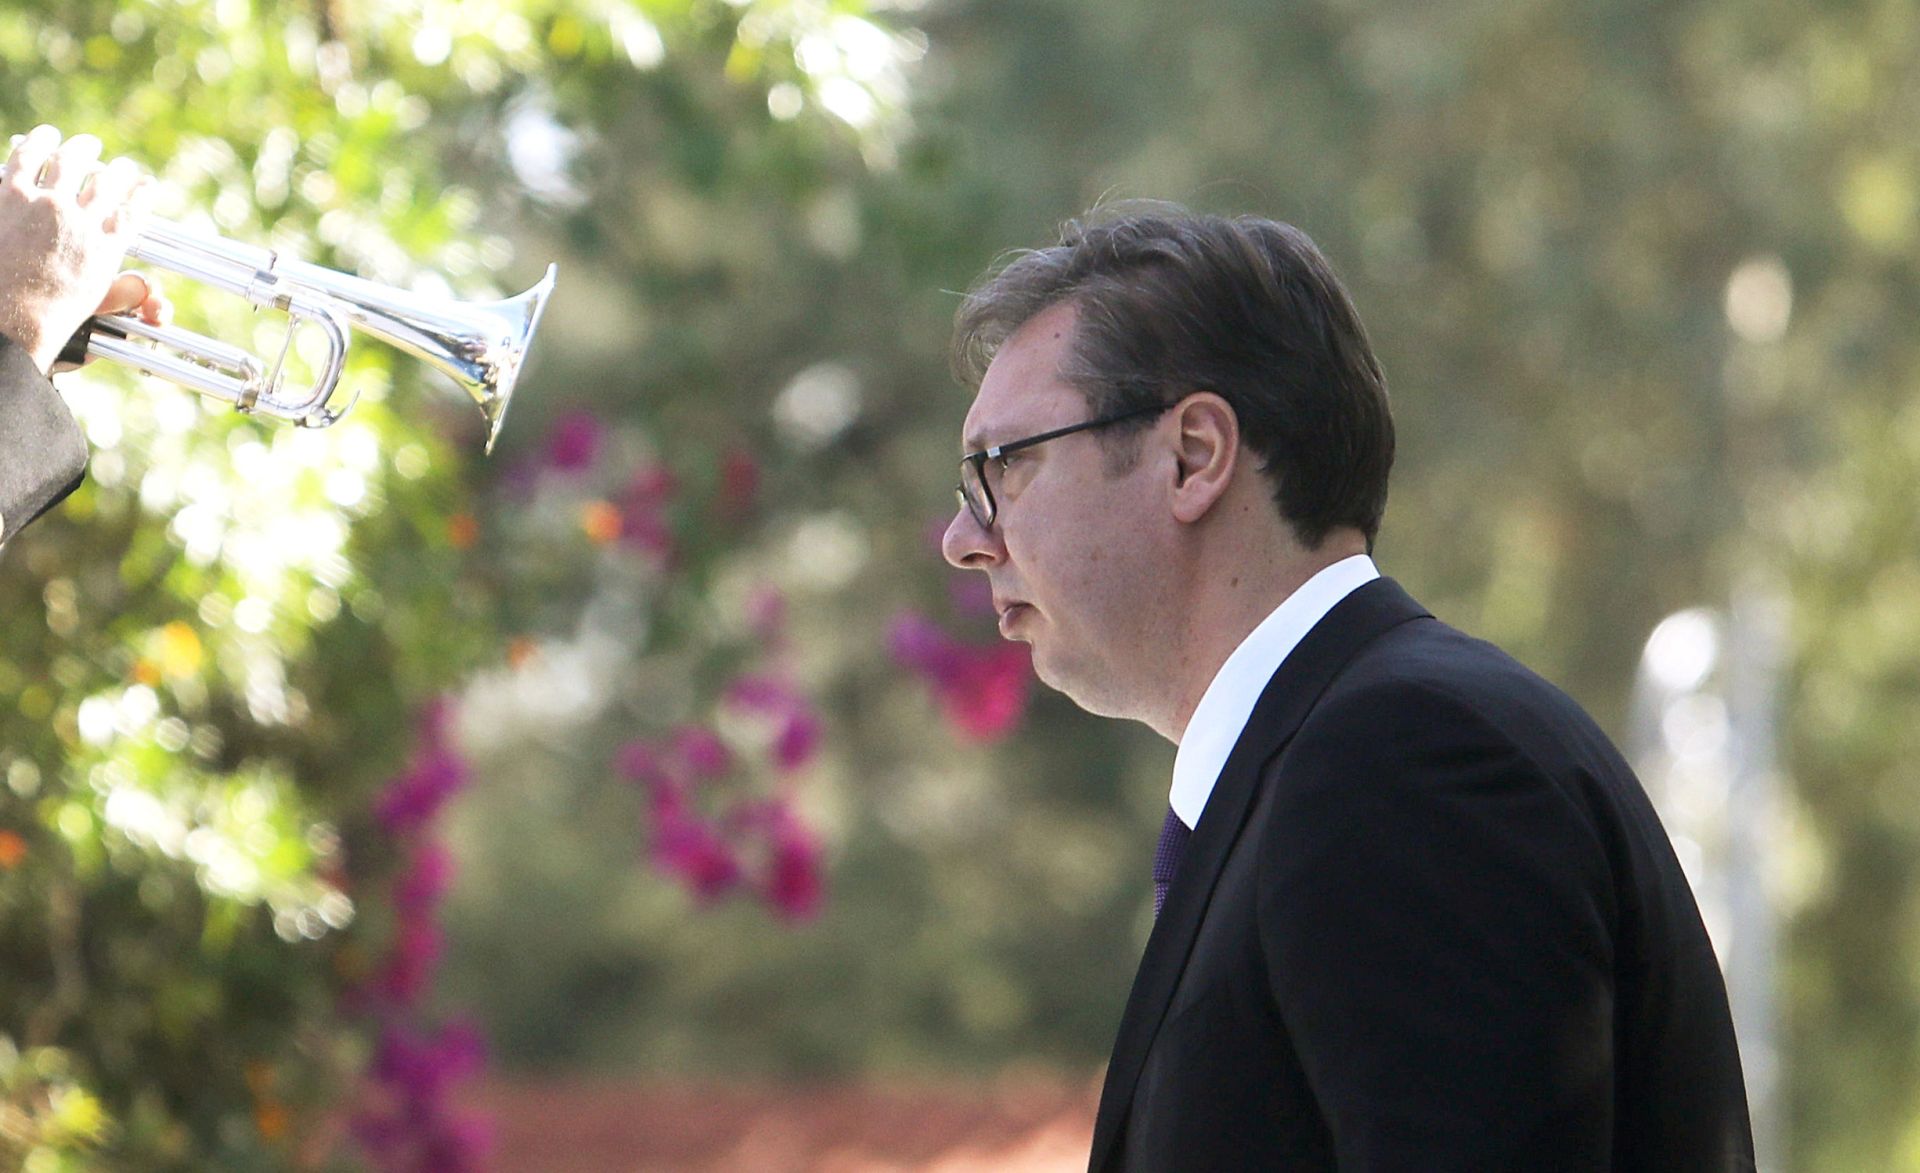 Serbia's President Aleksandar Vucic is seen during a welcome ceremony at the Presidential Palace in Nicosia Serbia's President Aleksandar Vucic is seen during a welcome ceremony at the Presidential Palace in Nicosia, Cyprus November 30, 2018. REUTERS/Yiannis Kourtoglou YIANNIS KOURTOGLOU